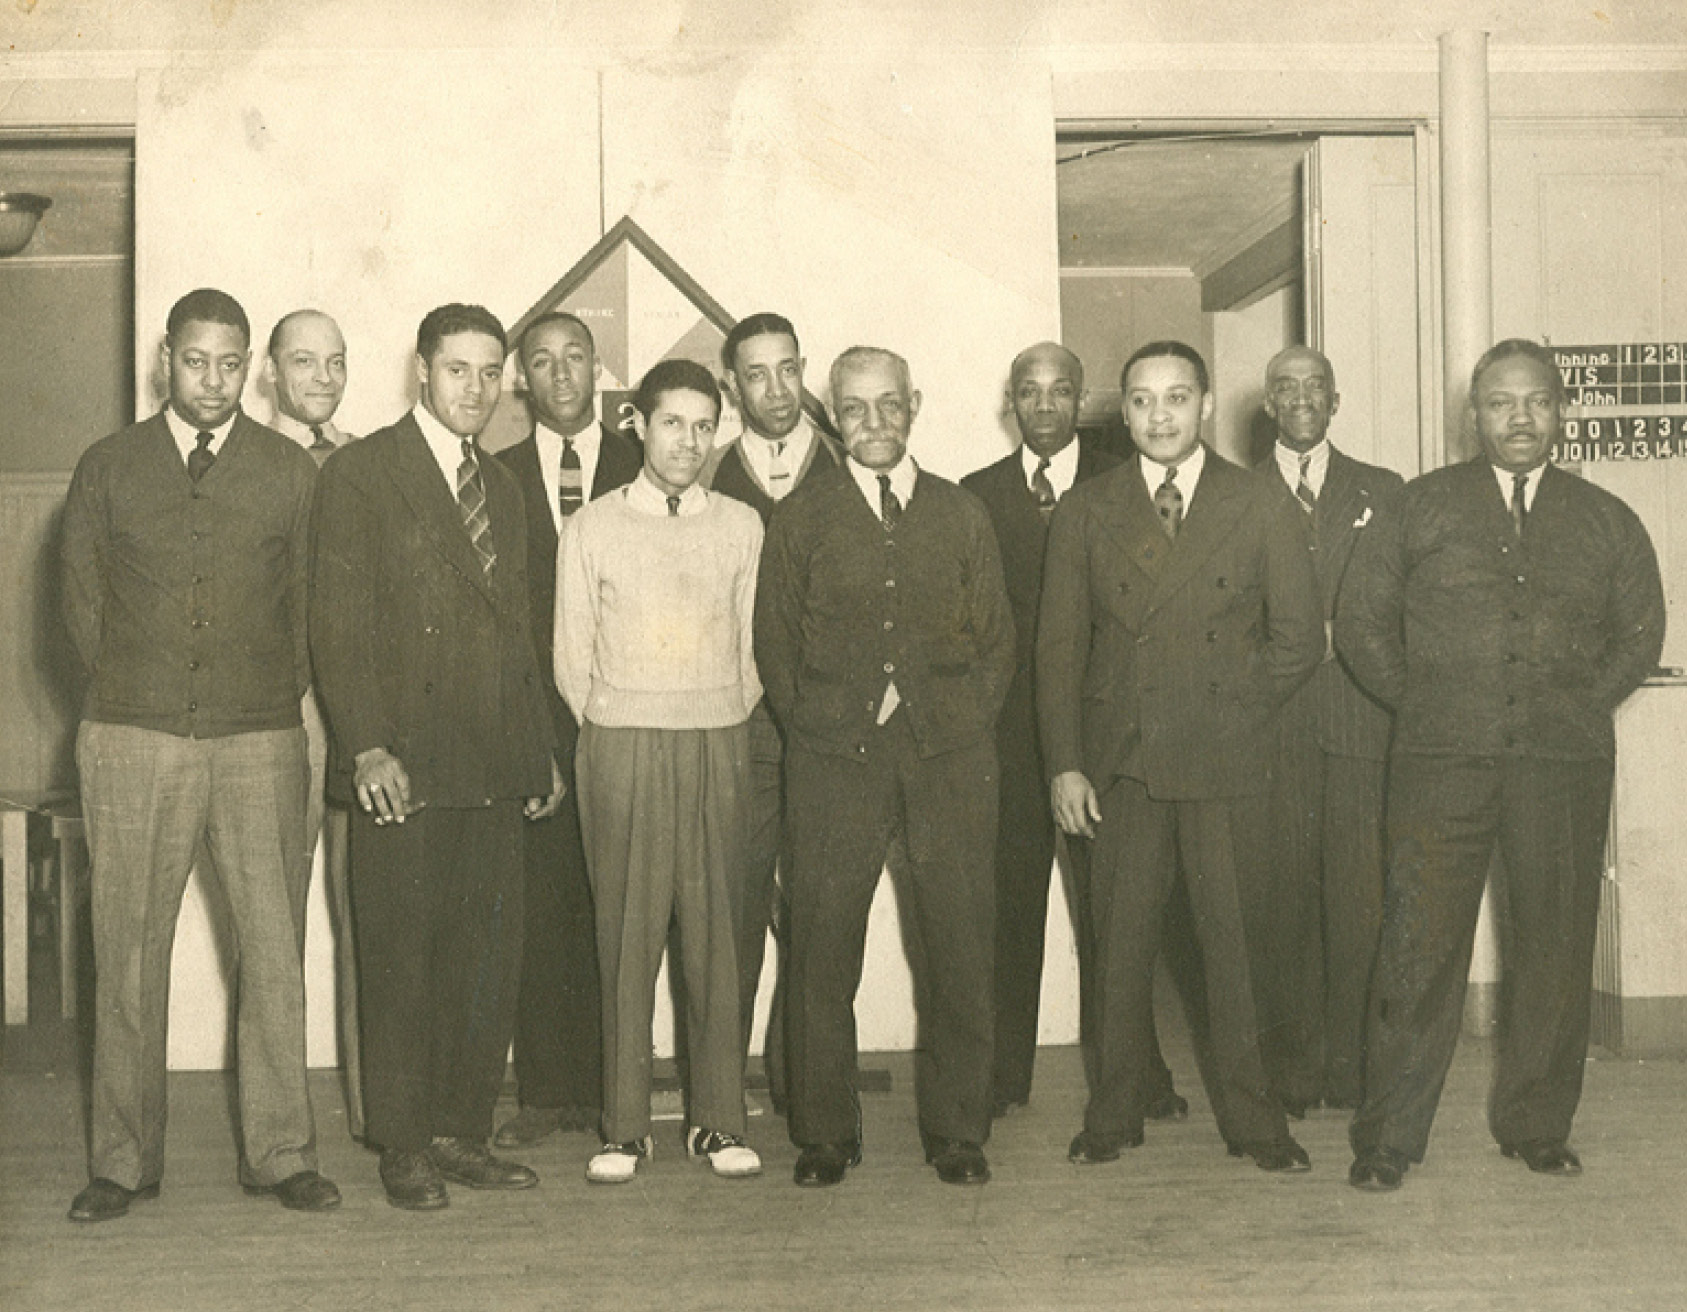 A Men’s Group gathering at the Center.